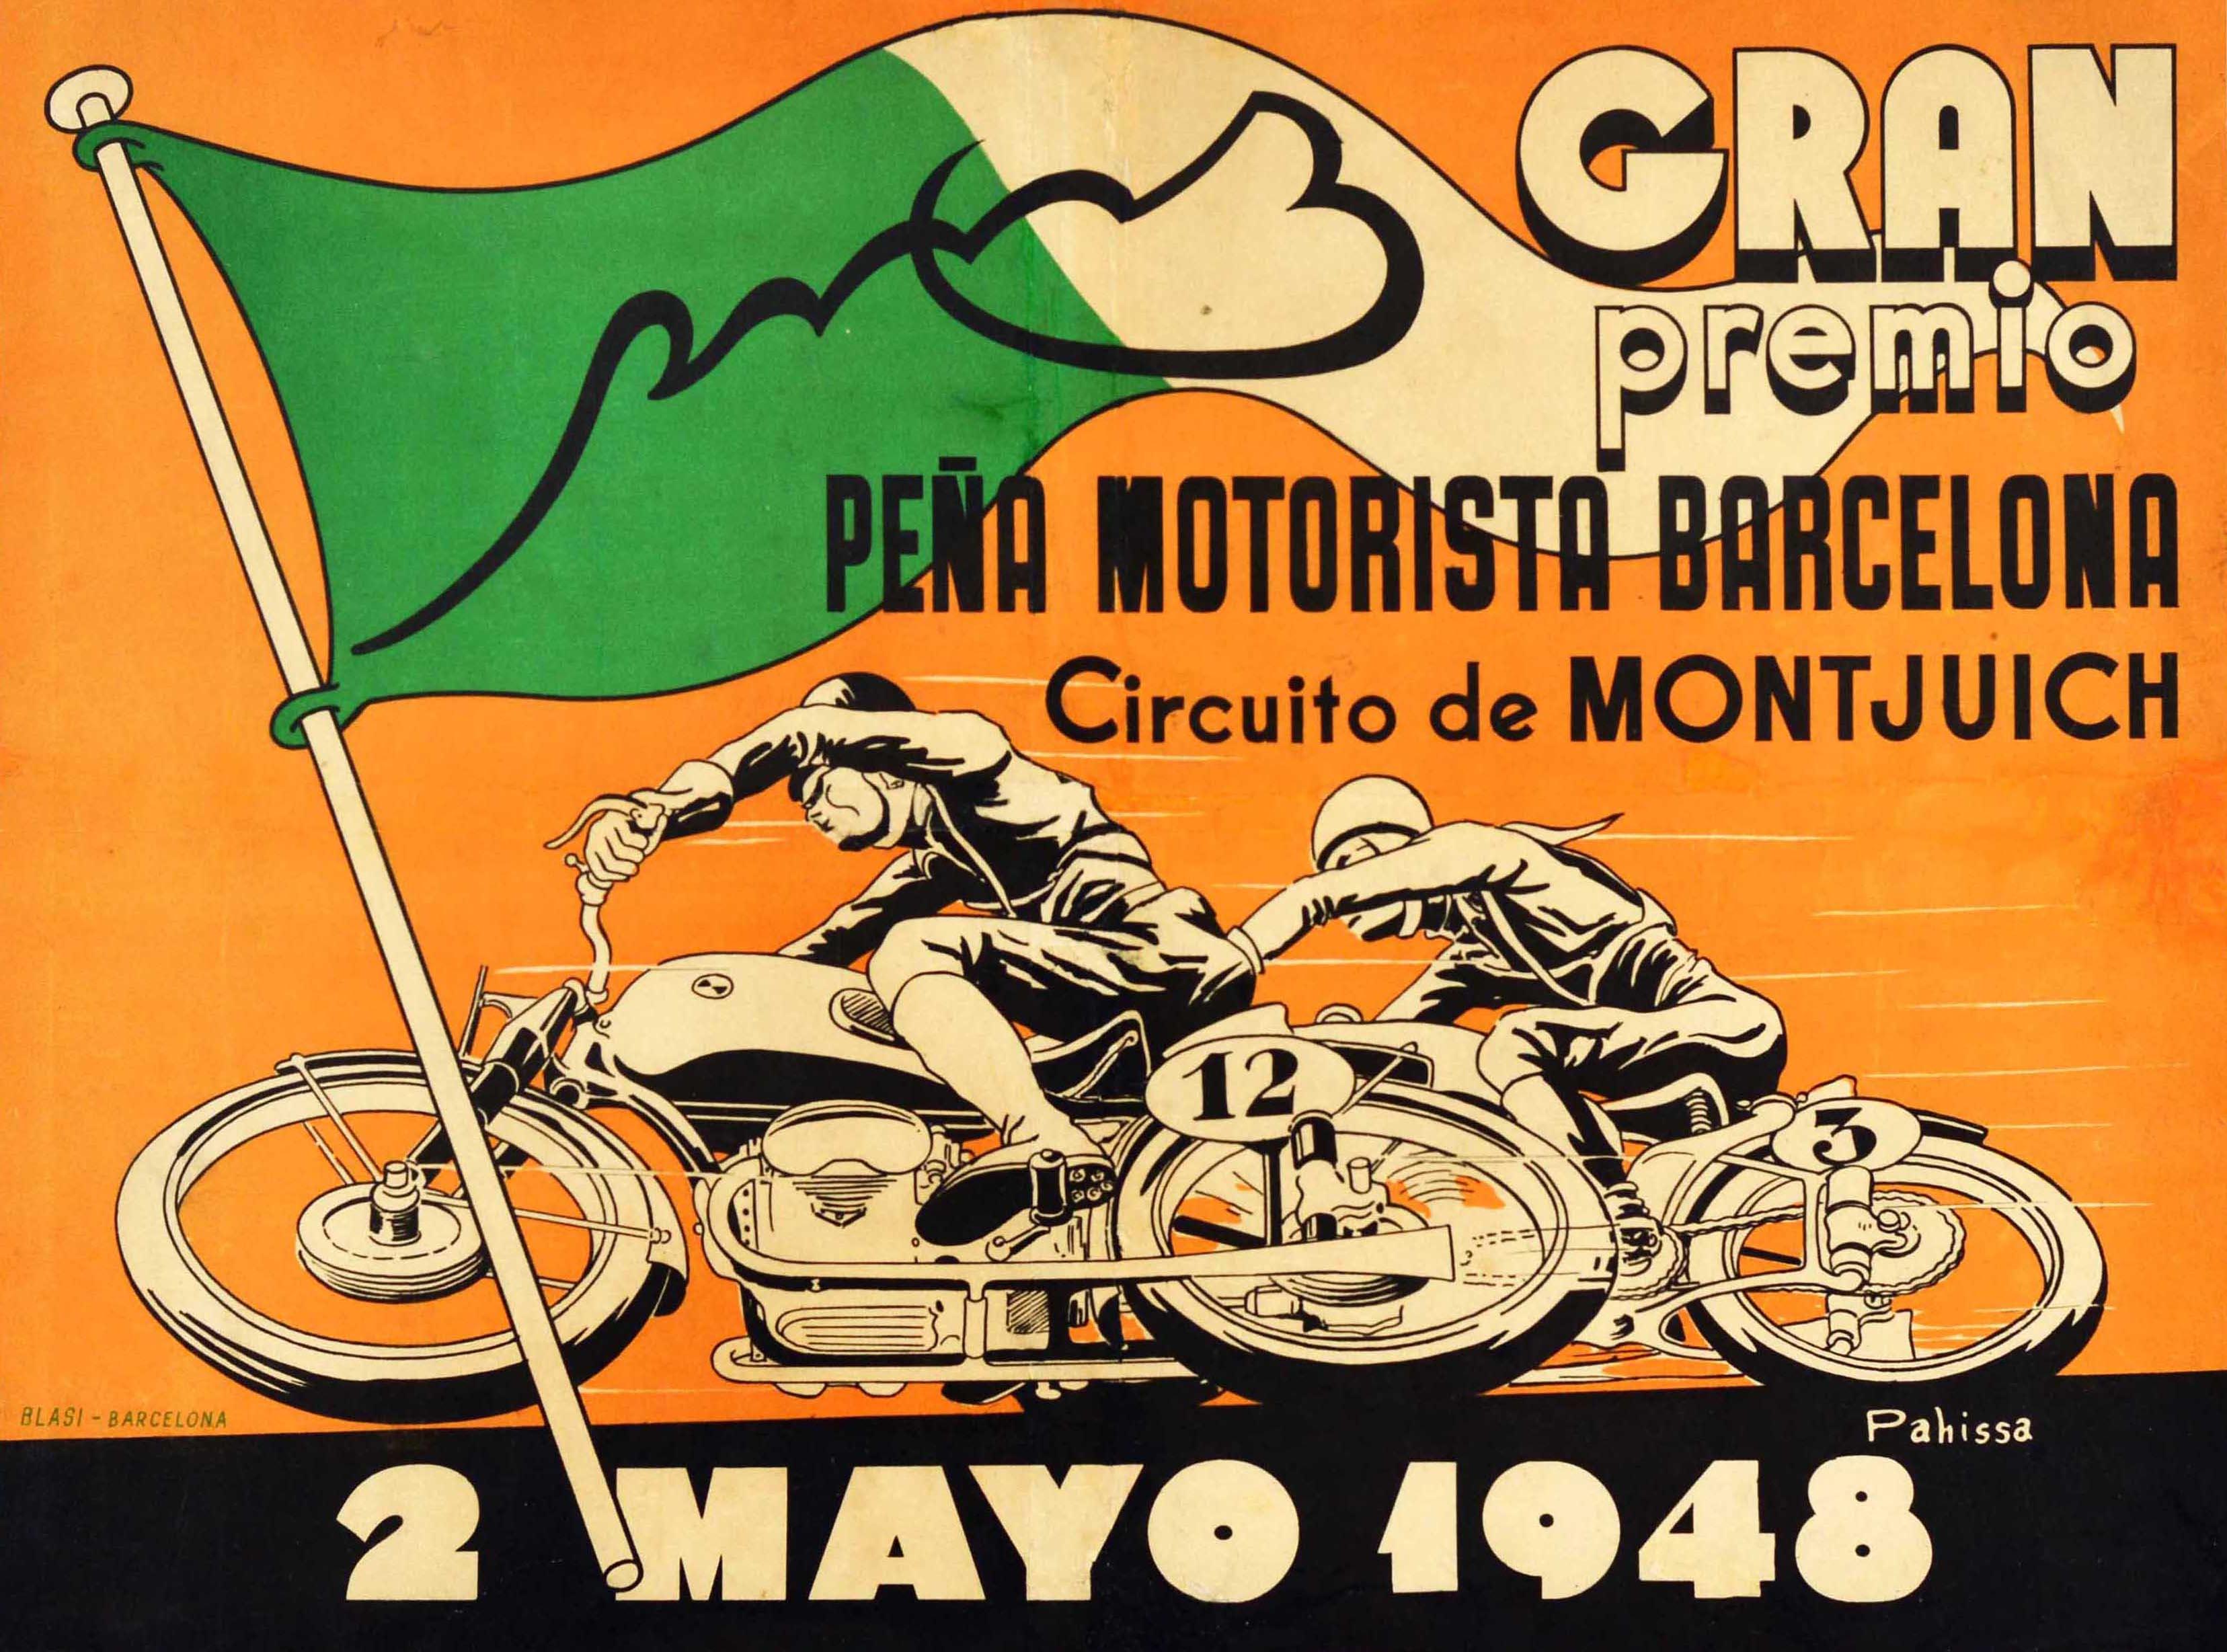 Original vintage motorsport poster for the Gran Premio Pena Motorista Barcelona Circuito de Montjuich / Grand Prix Pena Motorista Barcelona Montjuic Circuit on 2 May 1948 featuring a dynamic design of two motorbike riders on motorcycles numbered 12